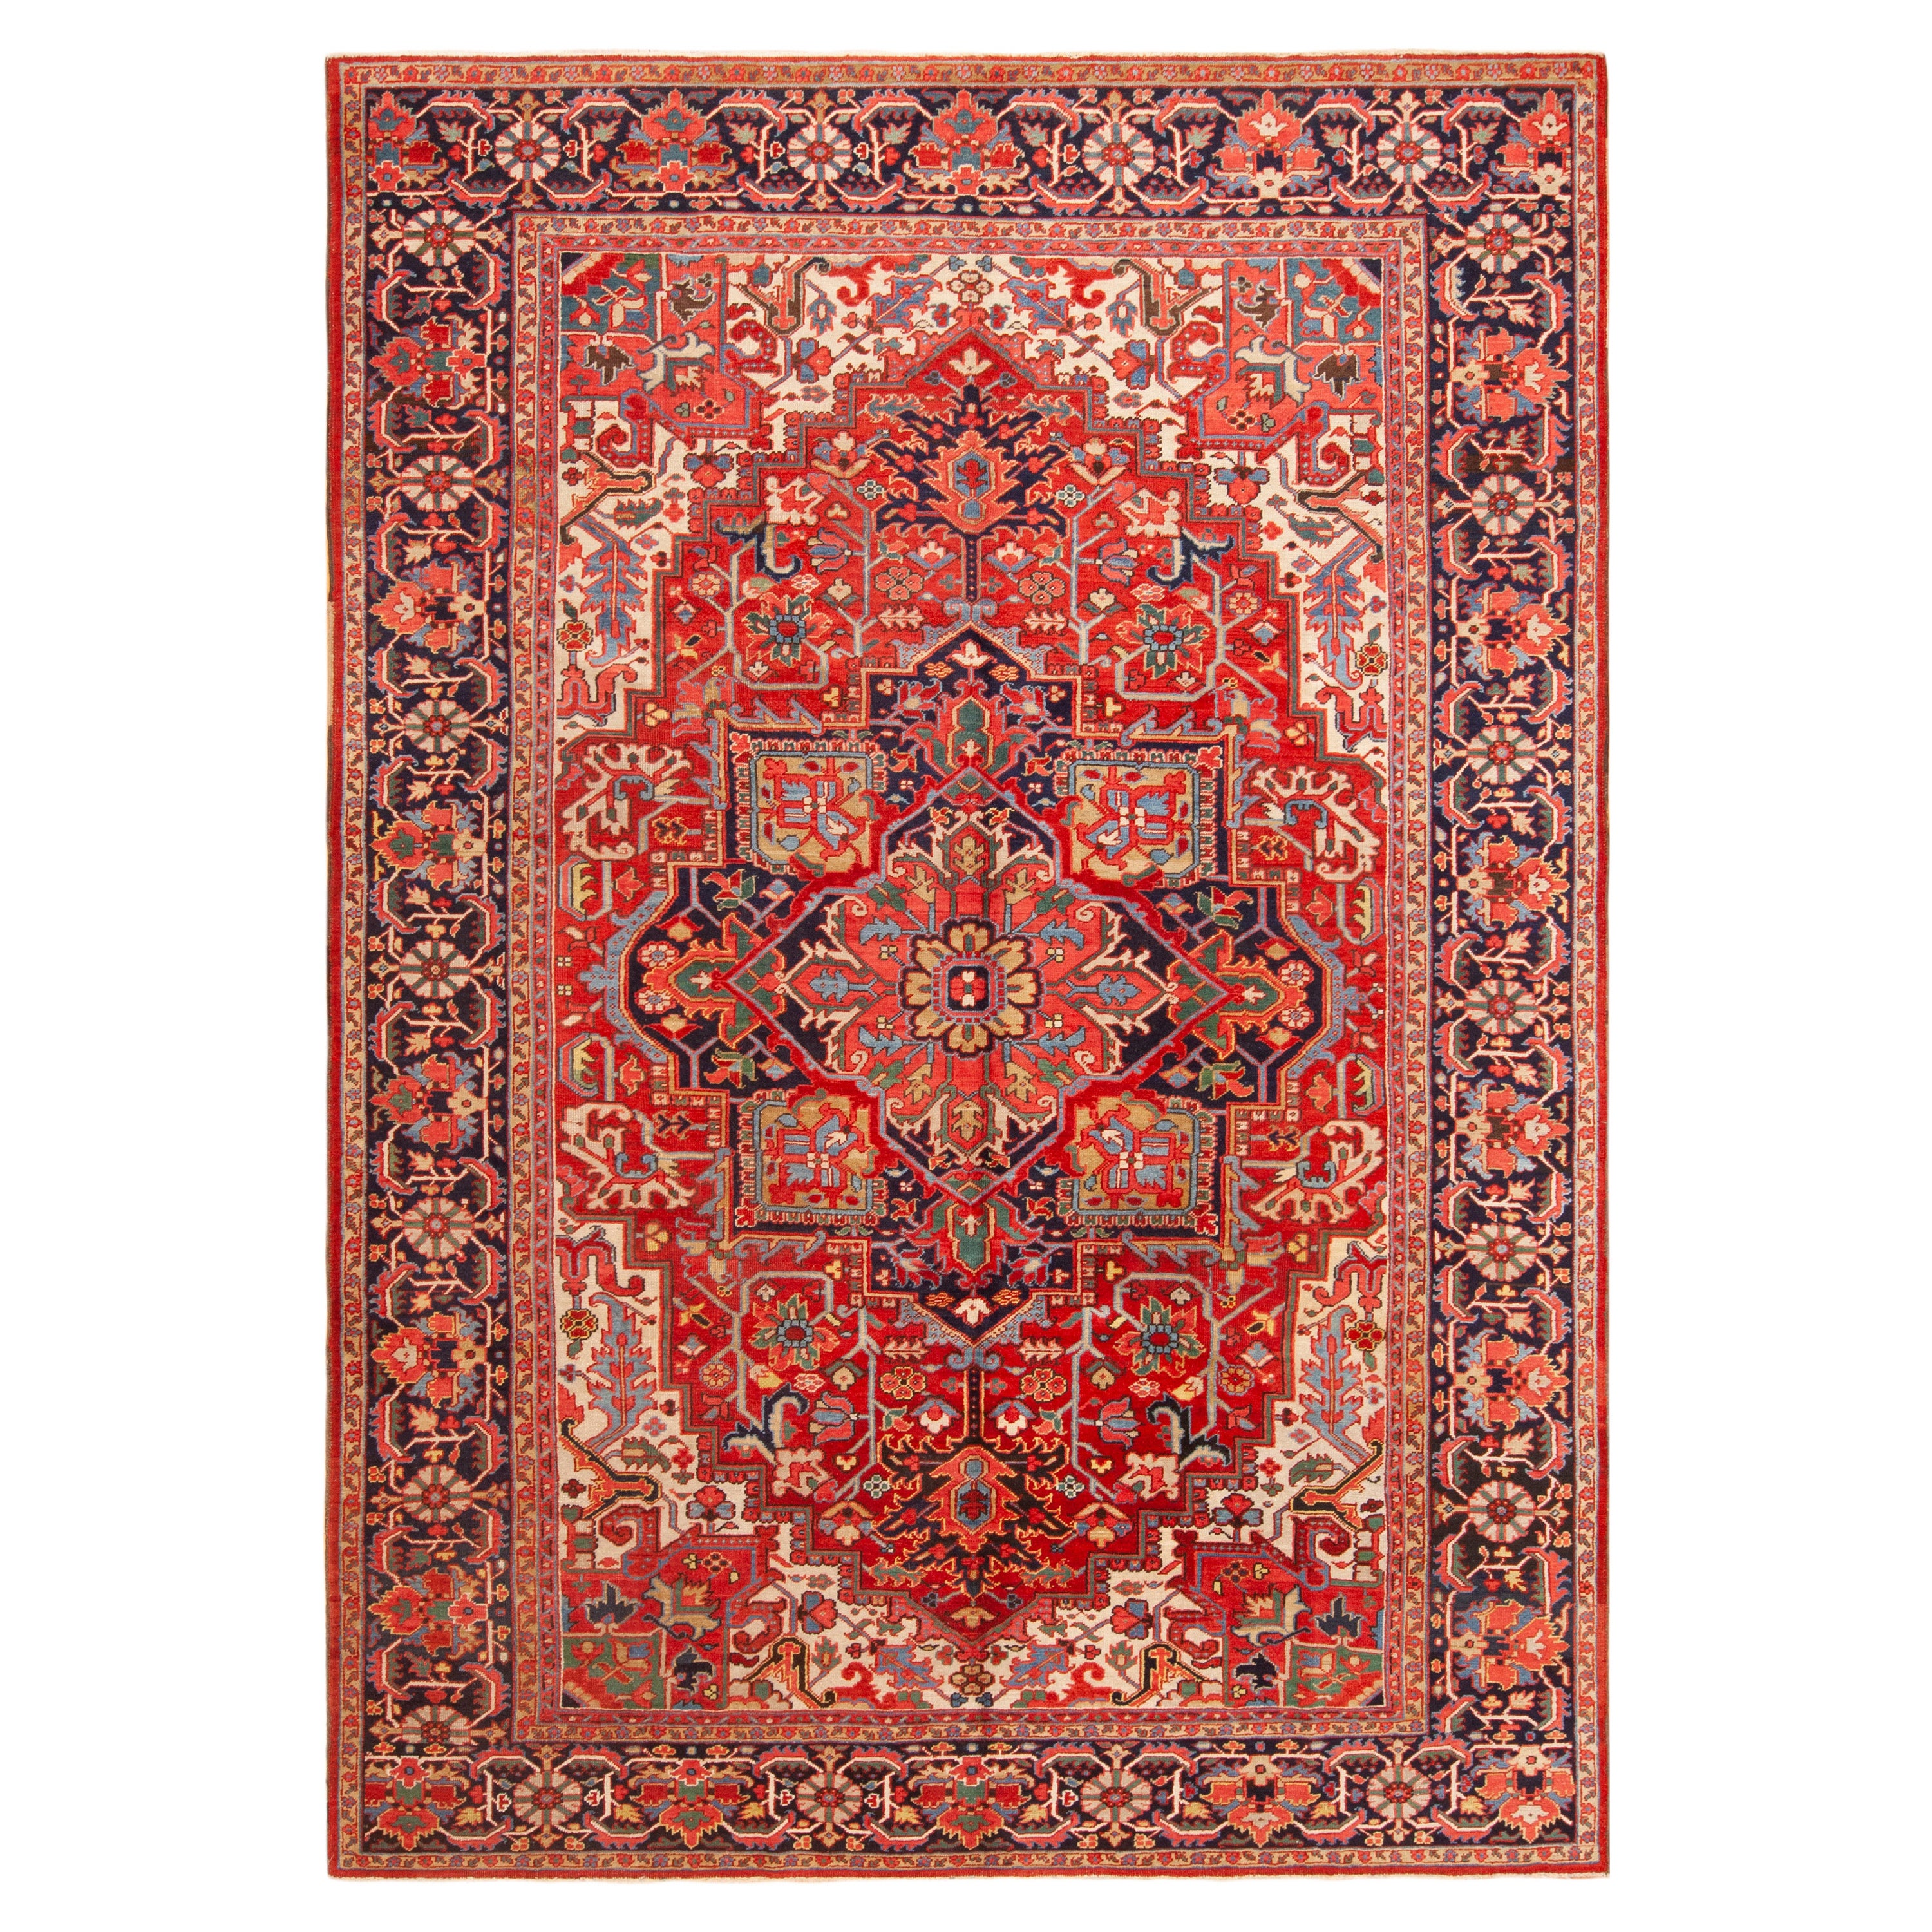 Extremely Impressive Antique Red Medallion Persian Heriz Rug 8'9" x 12'1"